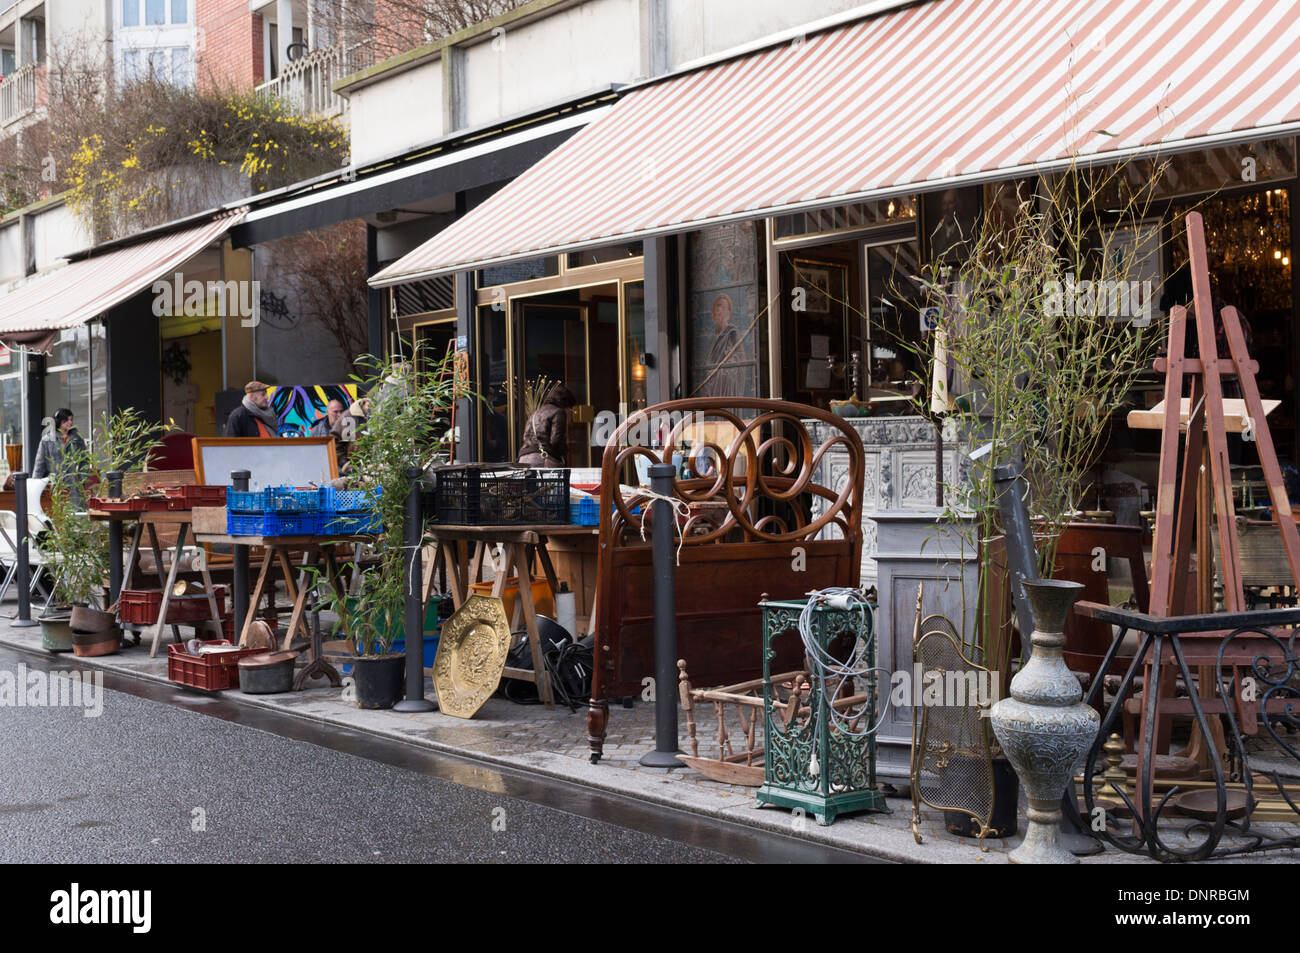 Marché aux Puces (flea market) at St-Ouen near to Clignancourt in the north of Paris, France. Stock Photo